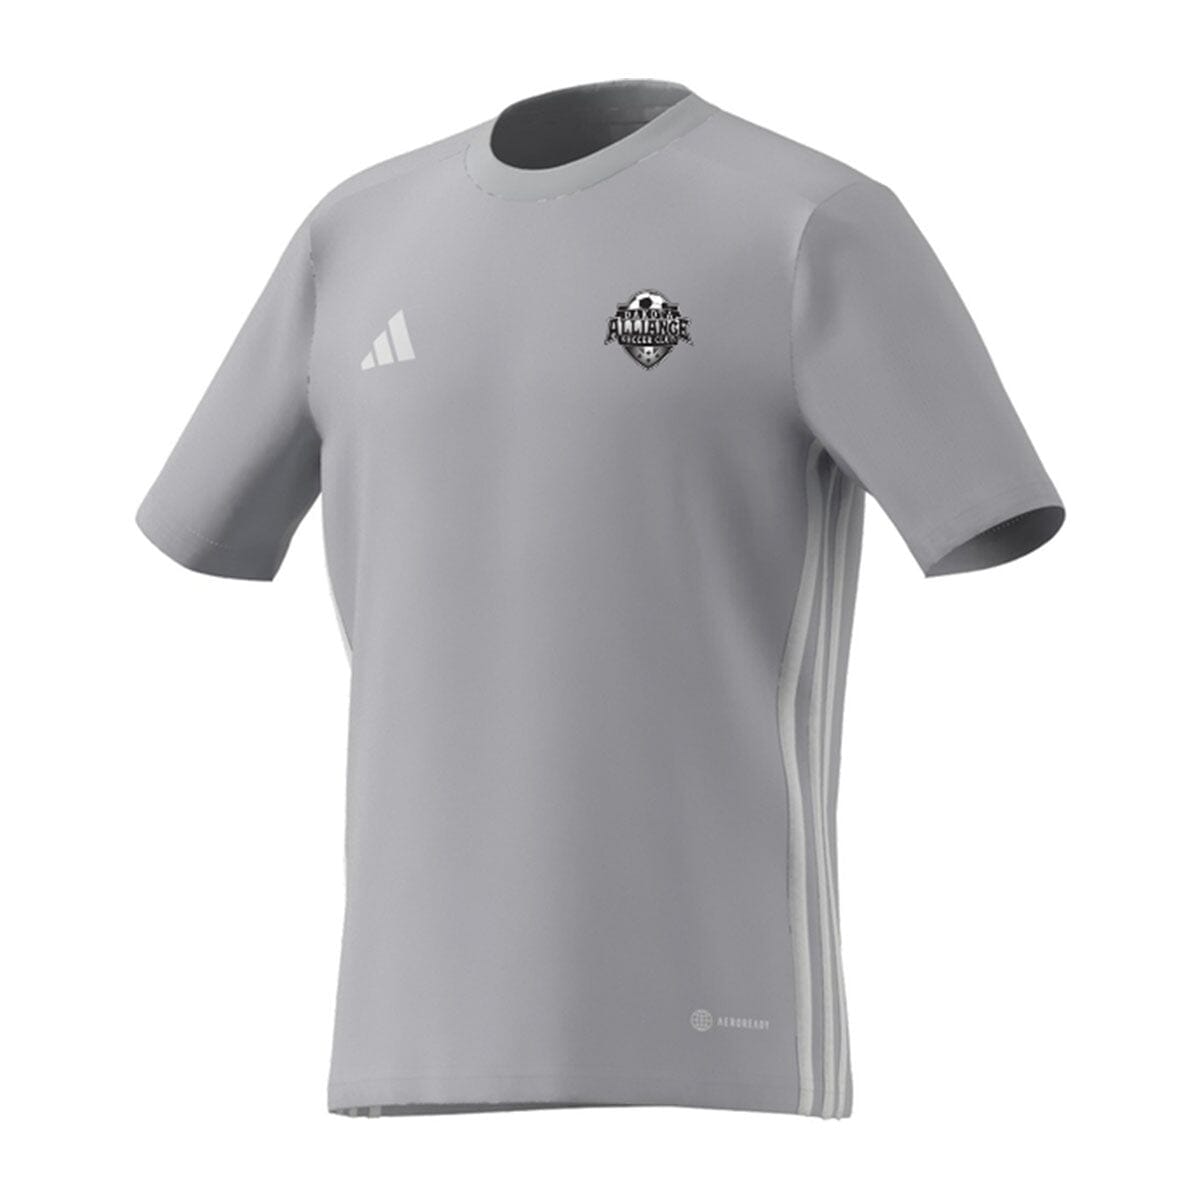 Adidas Youth Campeon 23 Jersey White M